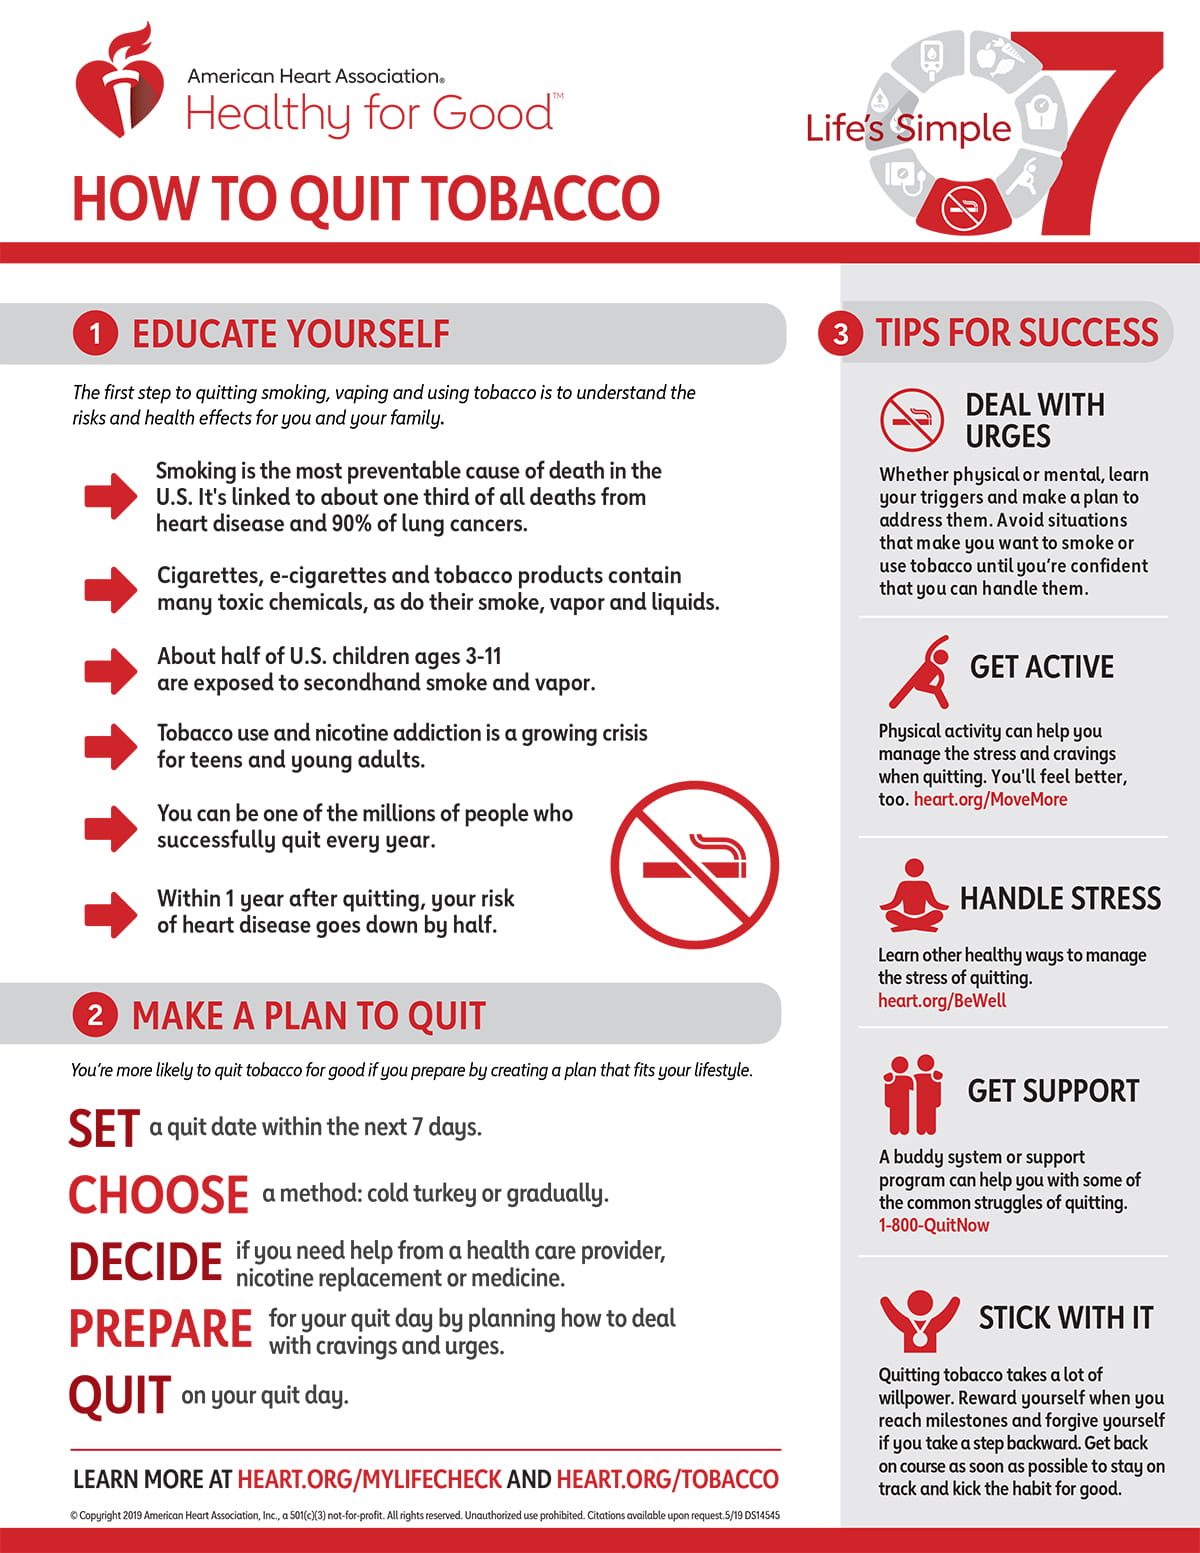 Quit Smoking: Is it possible? - Sunshine Community Health Center